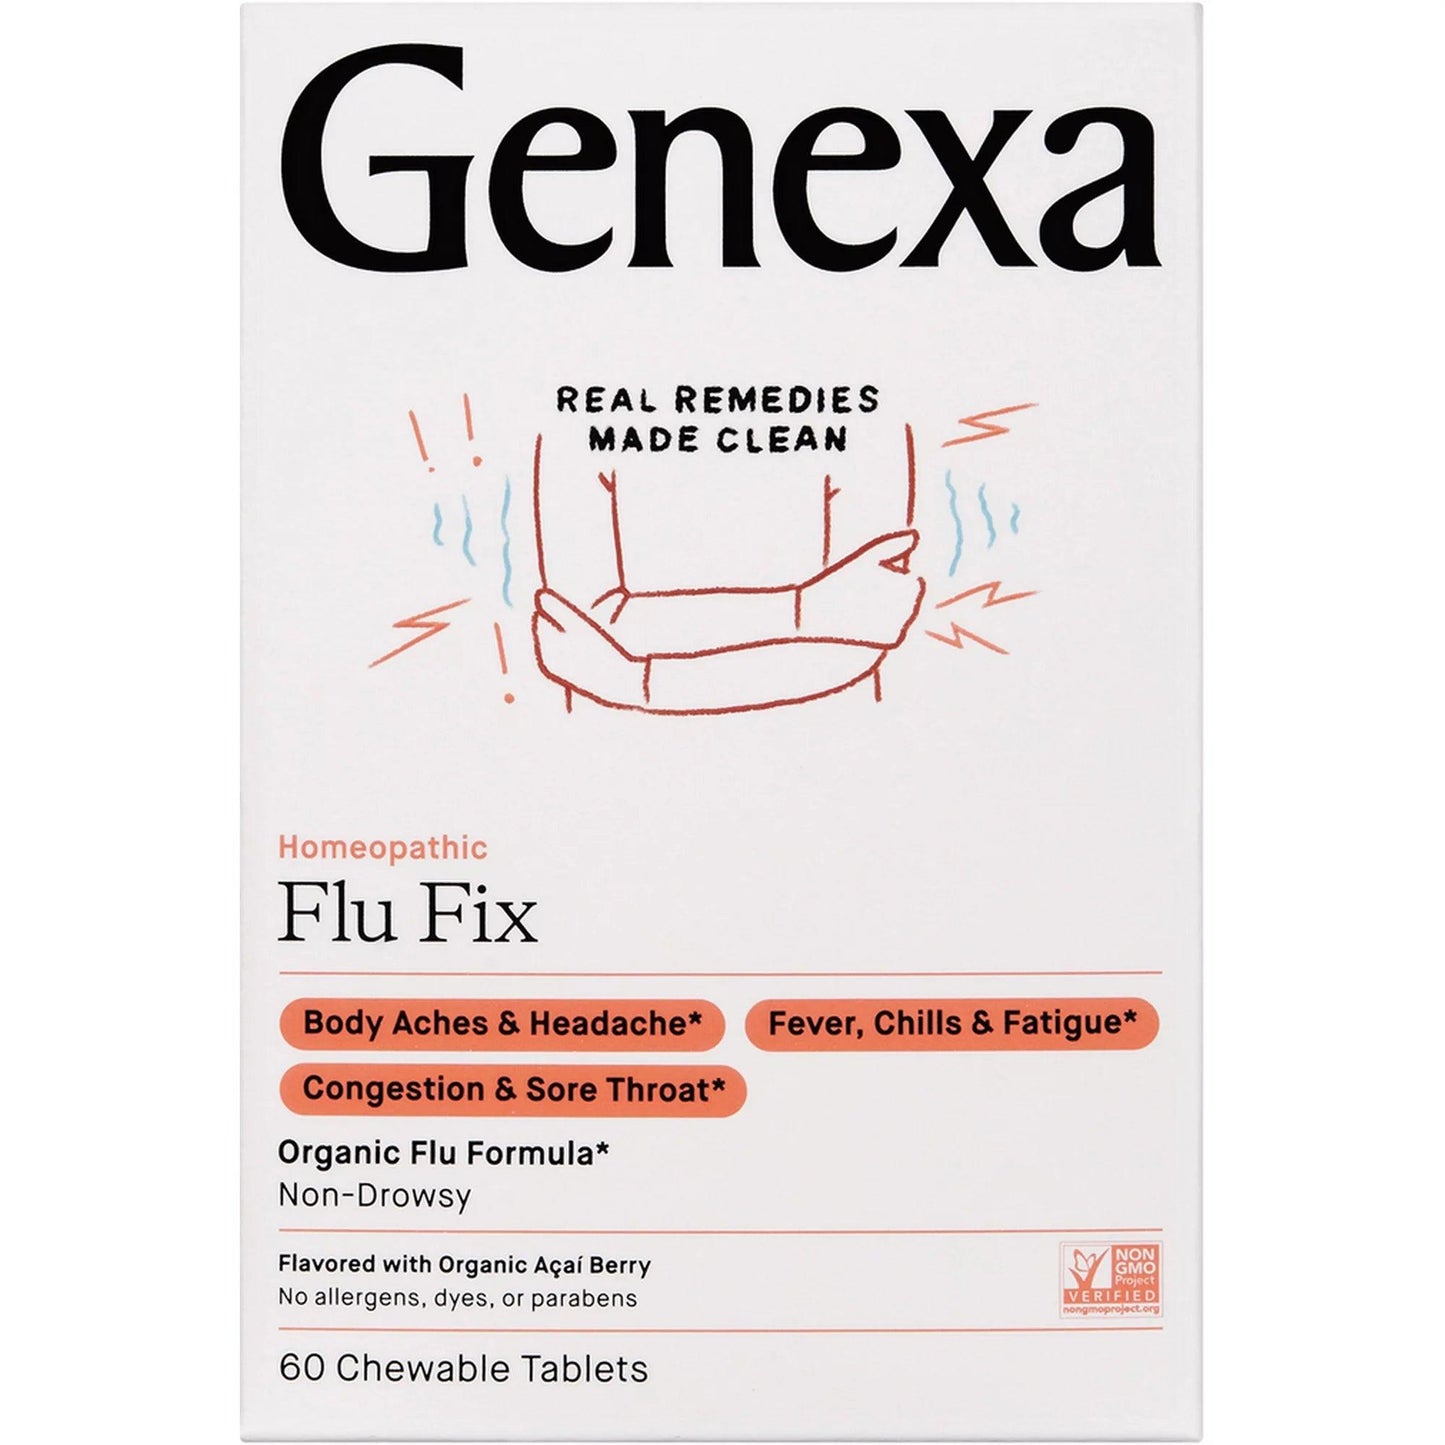 genexa | homeopathic flu fix | 60 chewable tablets | BEST BY 01/24 - Home Revival Shop